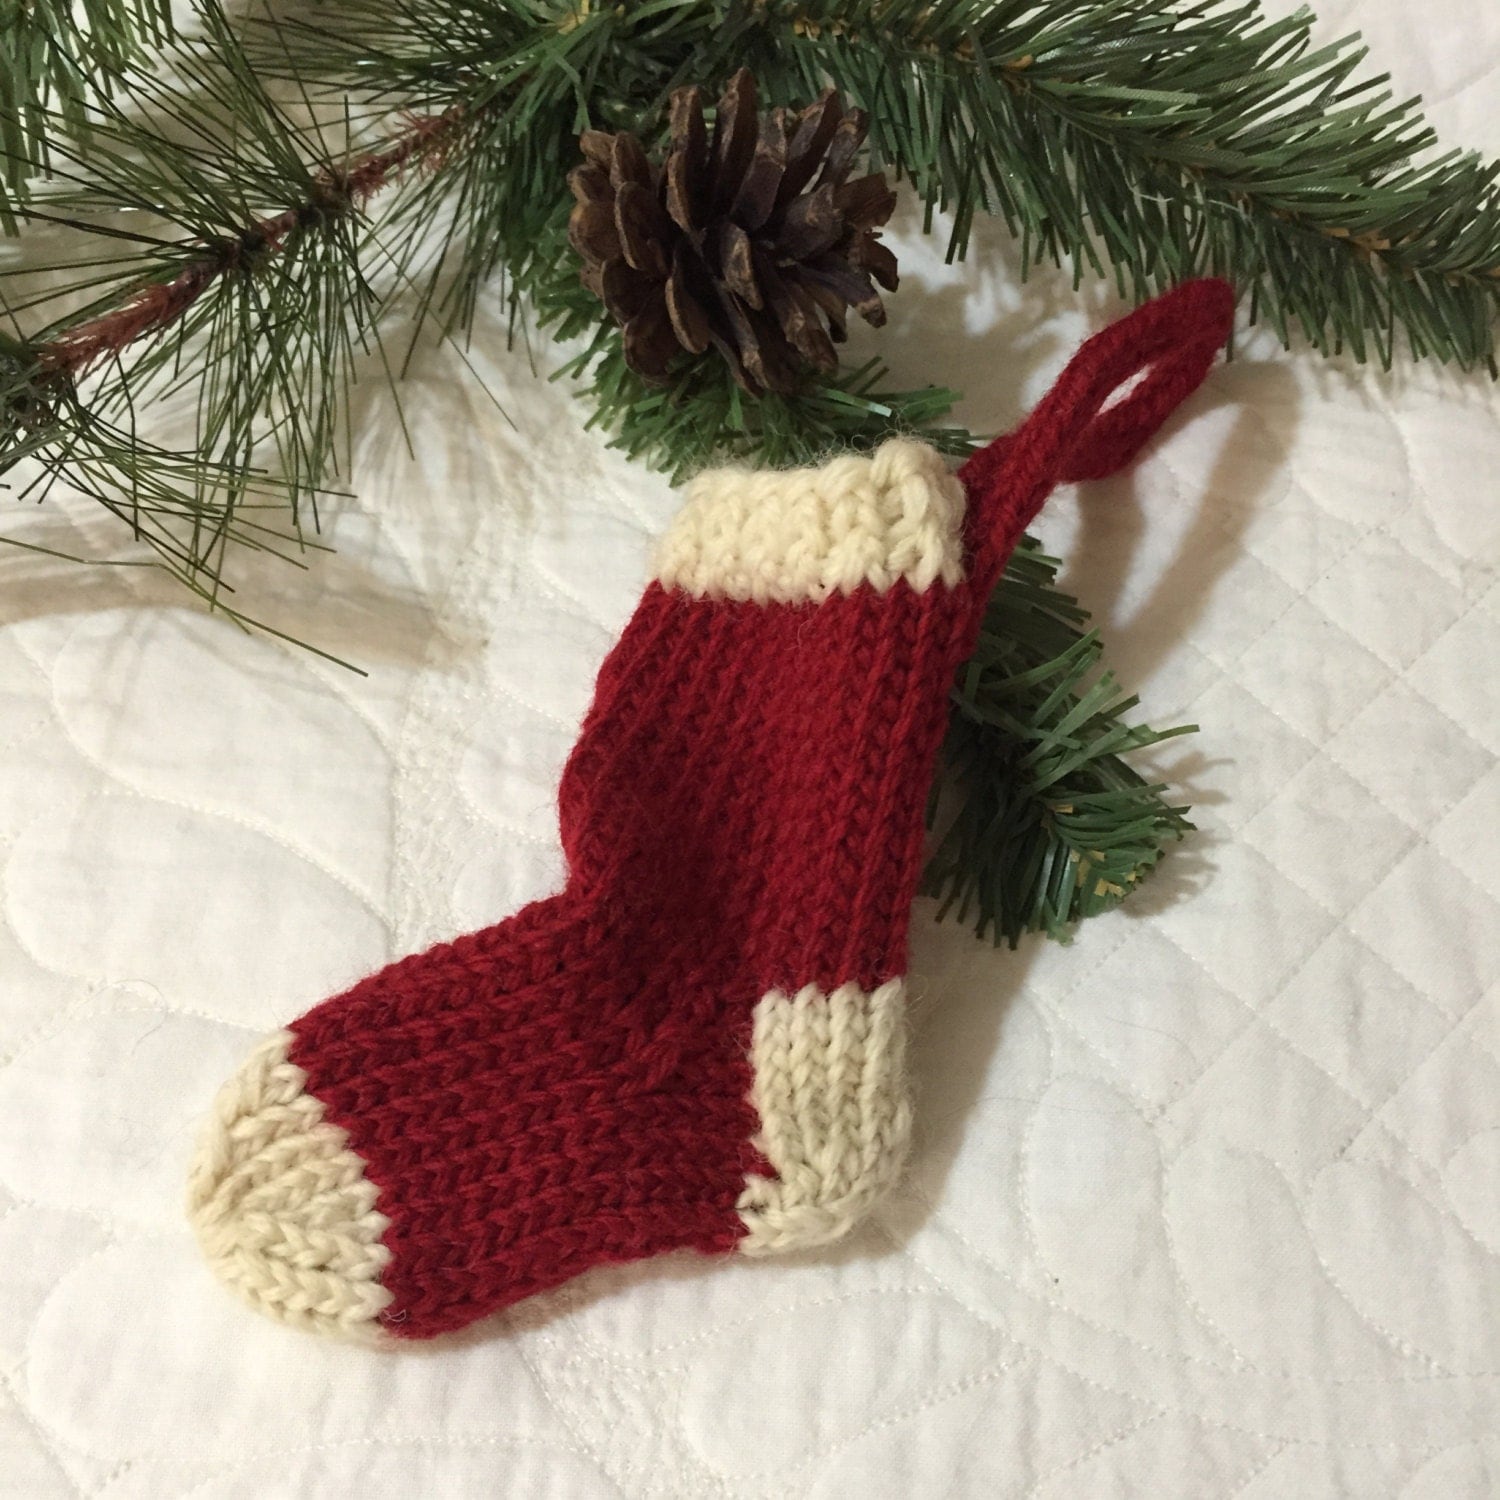 Miniature Knitted Stocking Ornament Quiltsy Handmade